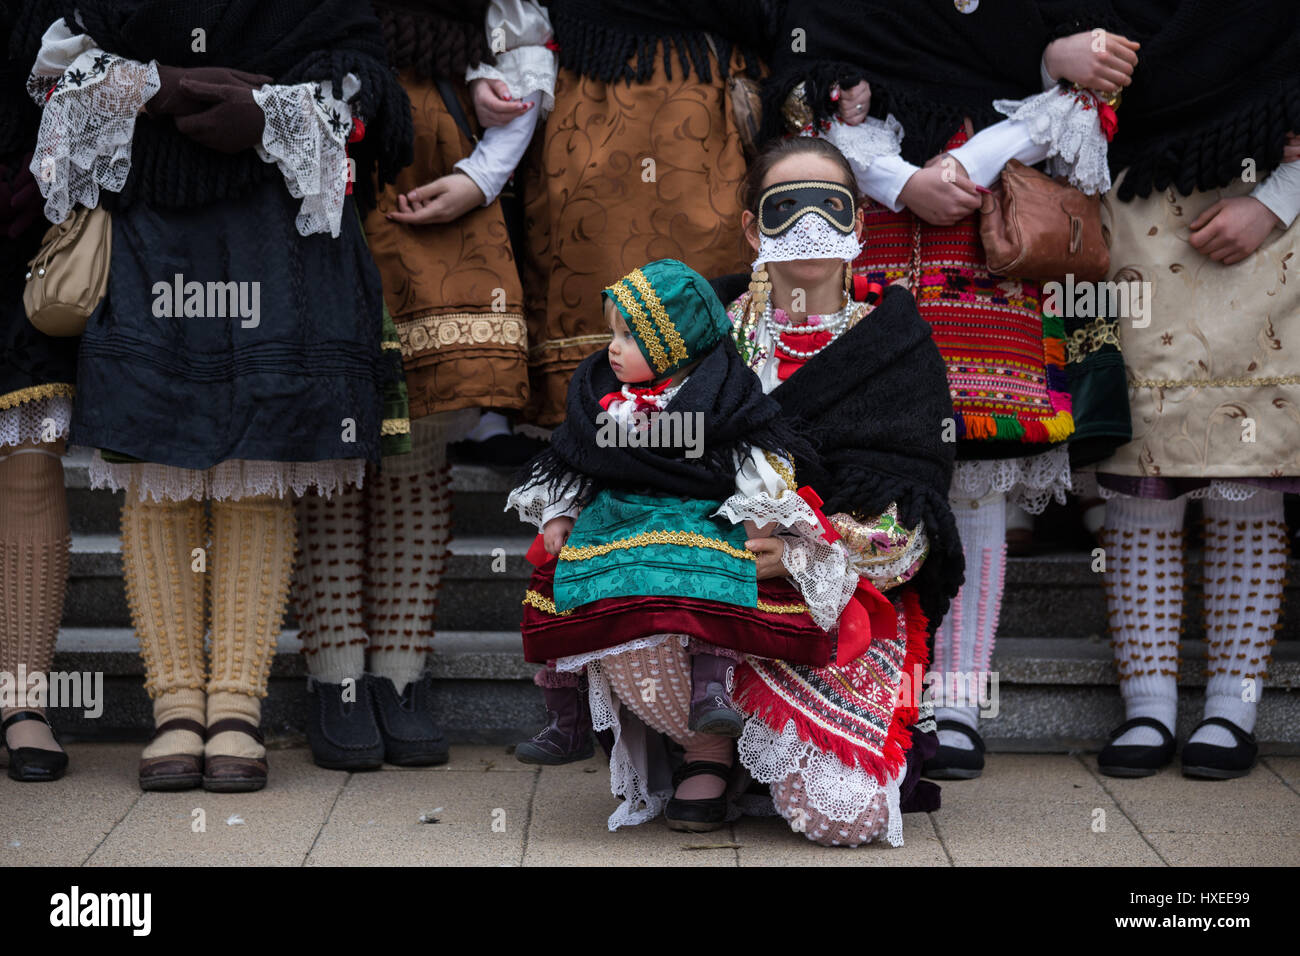 Group of sokac women with a young girl during the annual Buso festivities in Mohacs, Southern Hungary Stock Photo